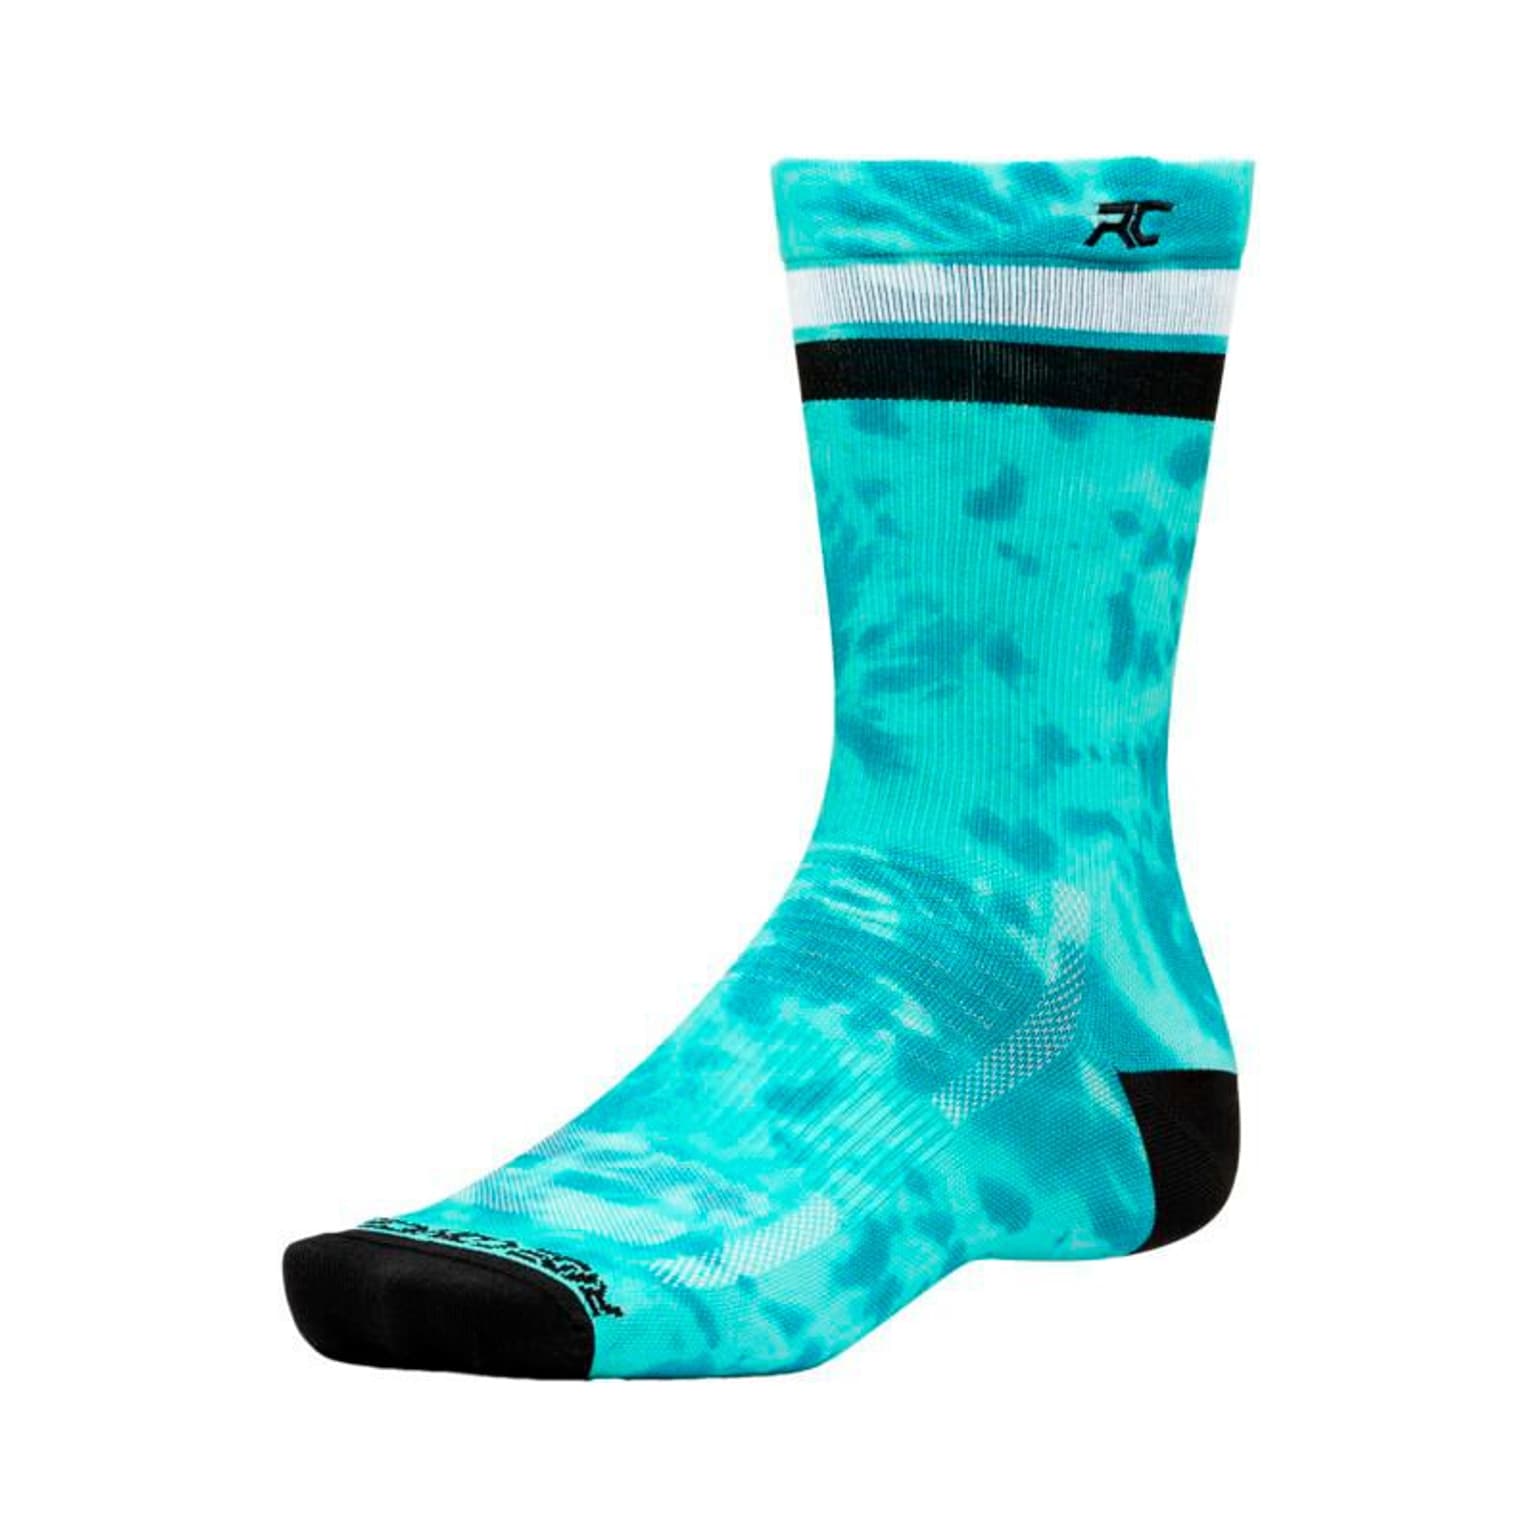 Ride Concepts Ride Concepts Alibi Synthetic Kids Velosocken turquoise 1